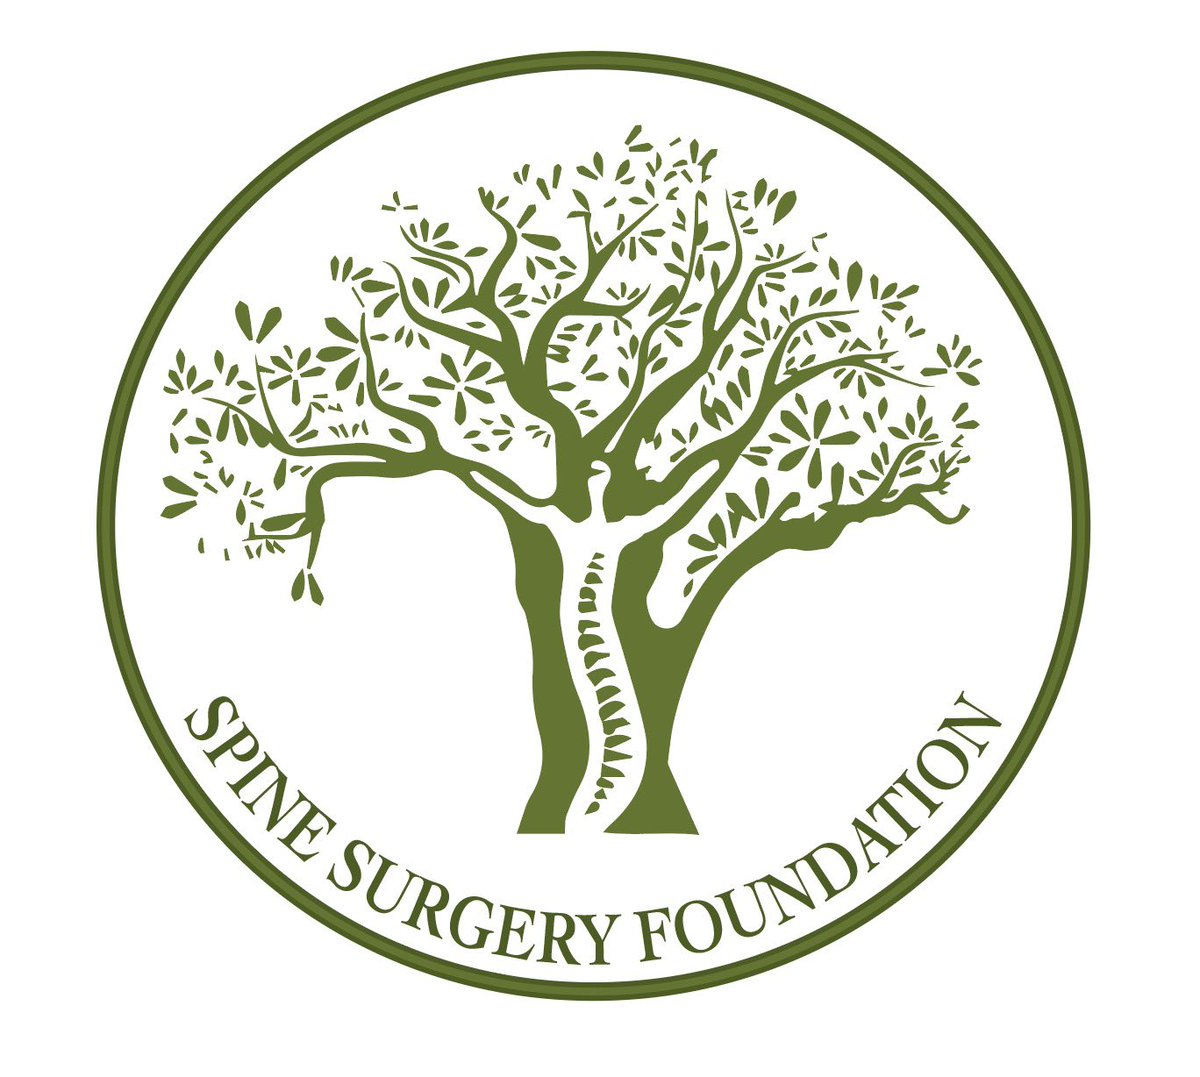 Thrilled to announce the launching of SPINE SURGERY FOUNDATION, a registered 501(c)(3) non-profit organization founded in January 2023 to perform free of charge spine surgeries in underserved communities. spinesurgeryfoundation.org Stay tuned for updates on our first trip to LEBANON